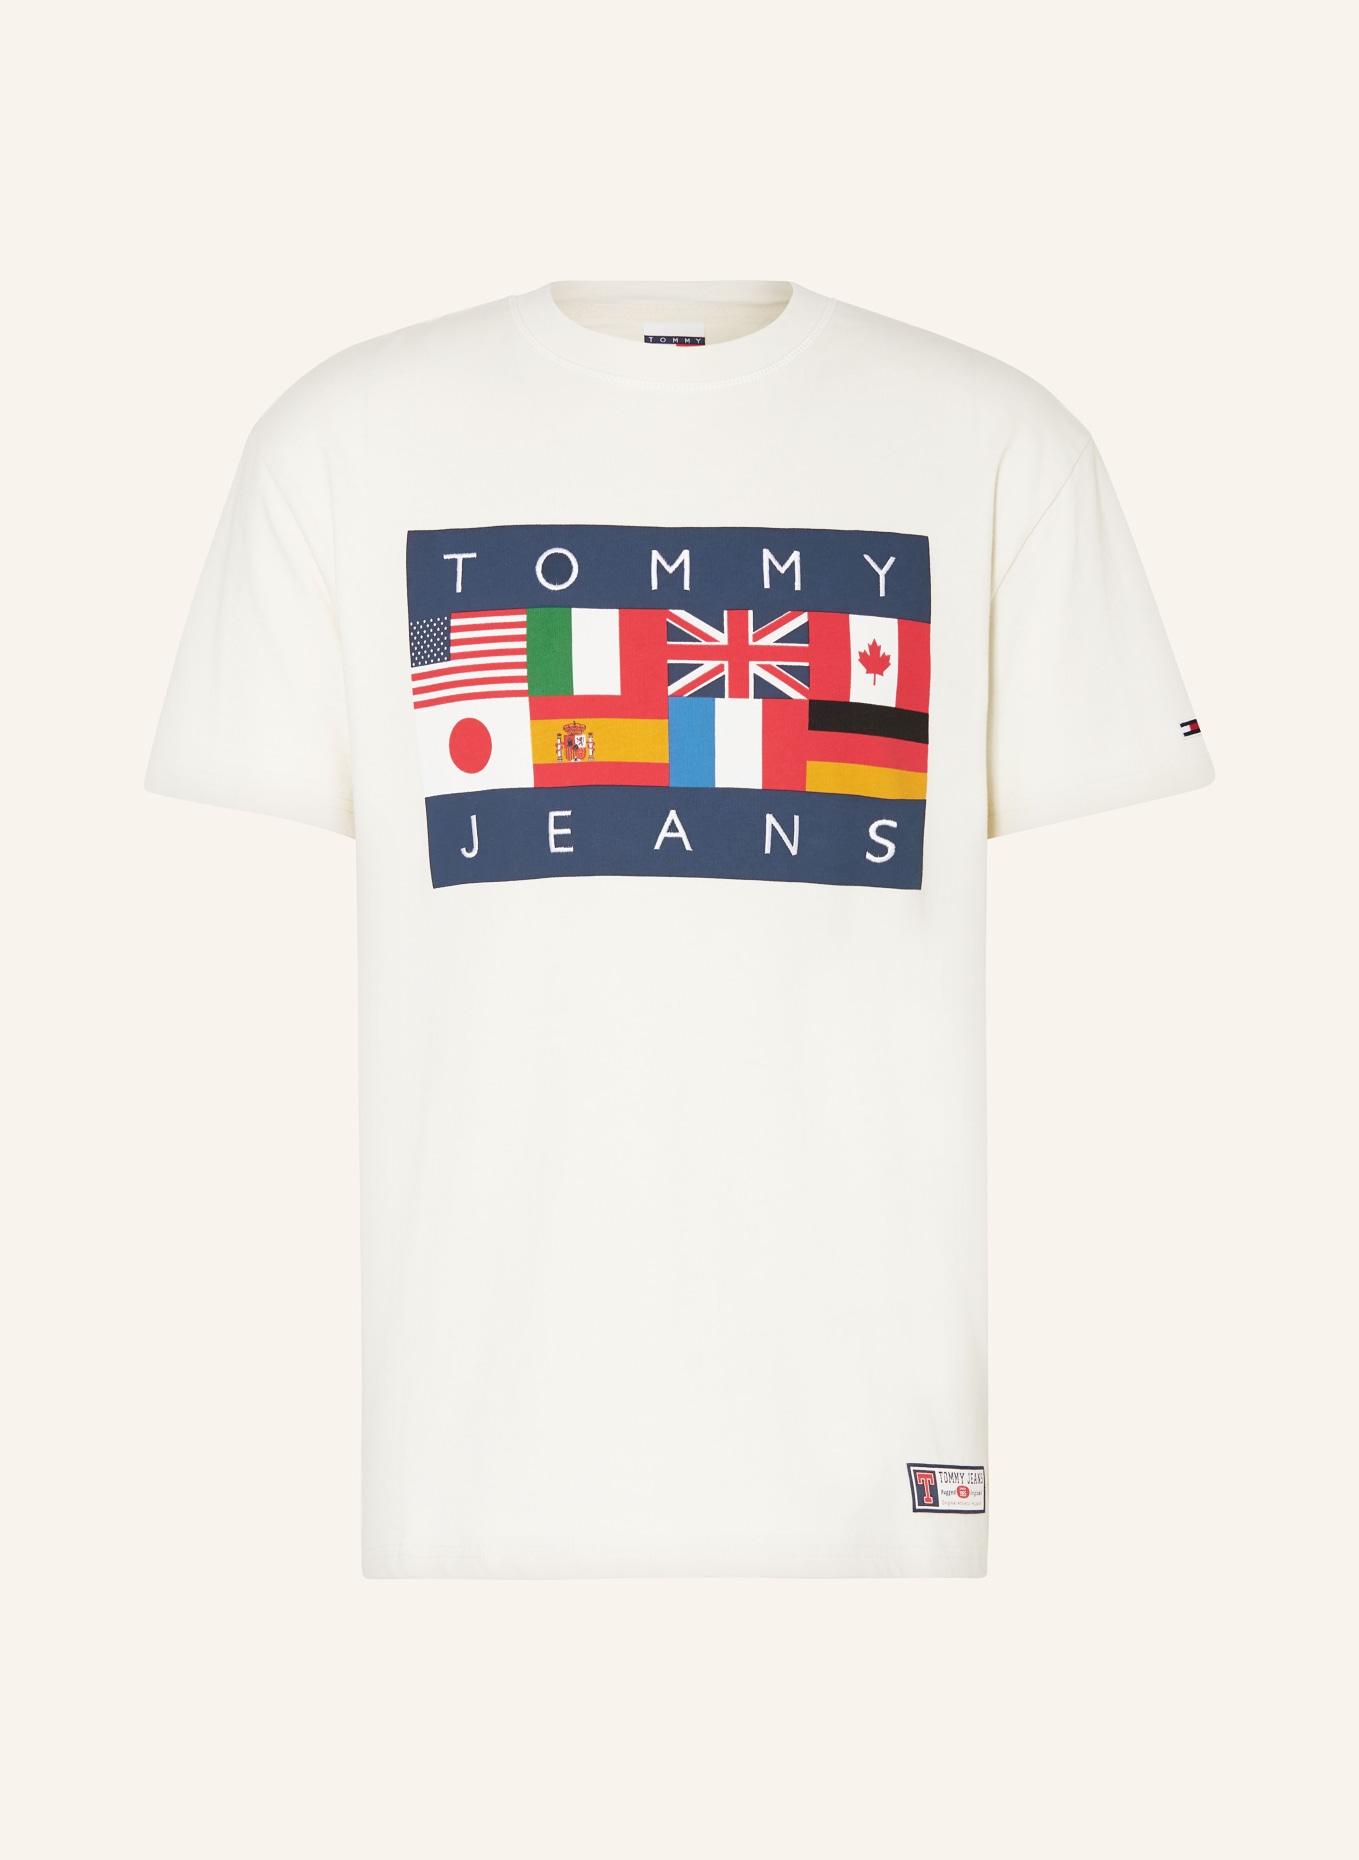 TOMMY JEANS T-shirt, Color: CREAM/ DARK BLUE/ RED (Image 1)